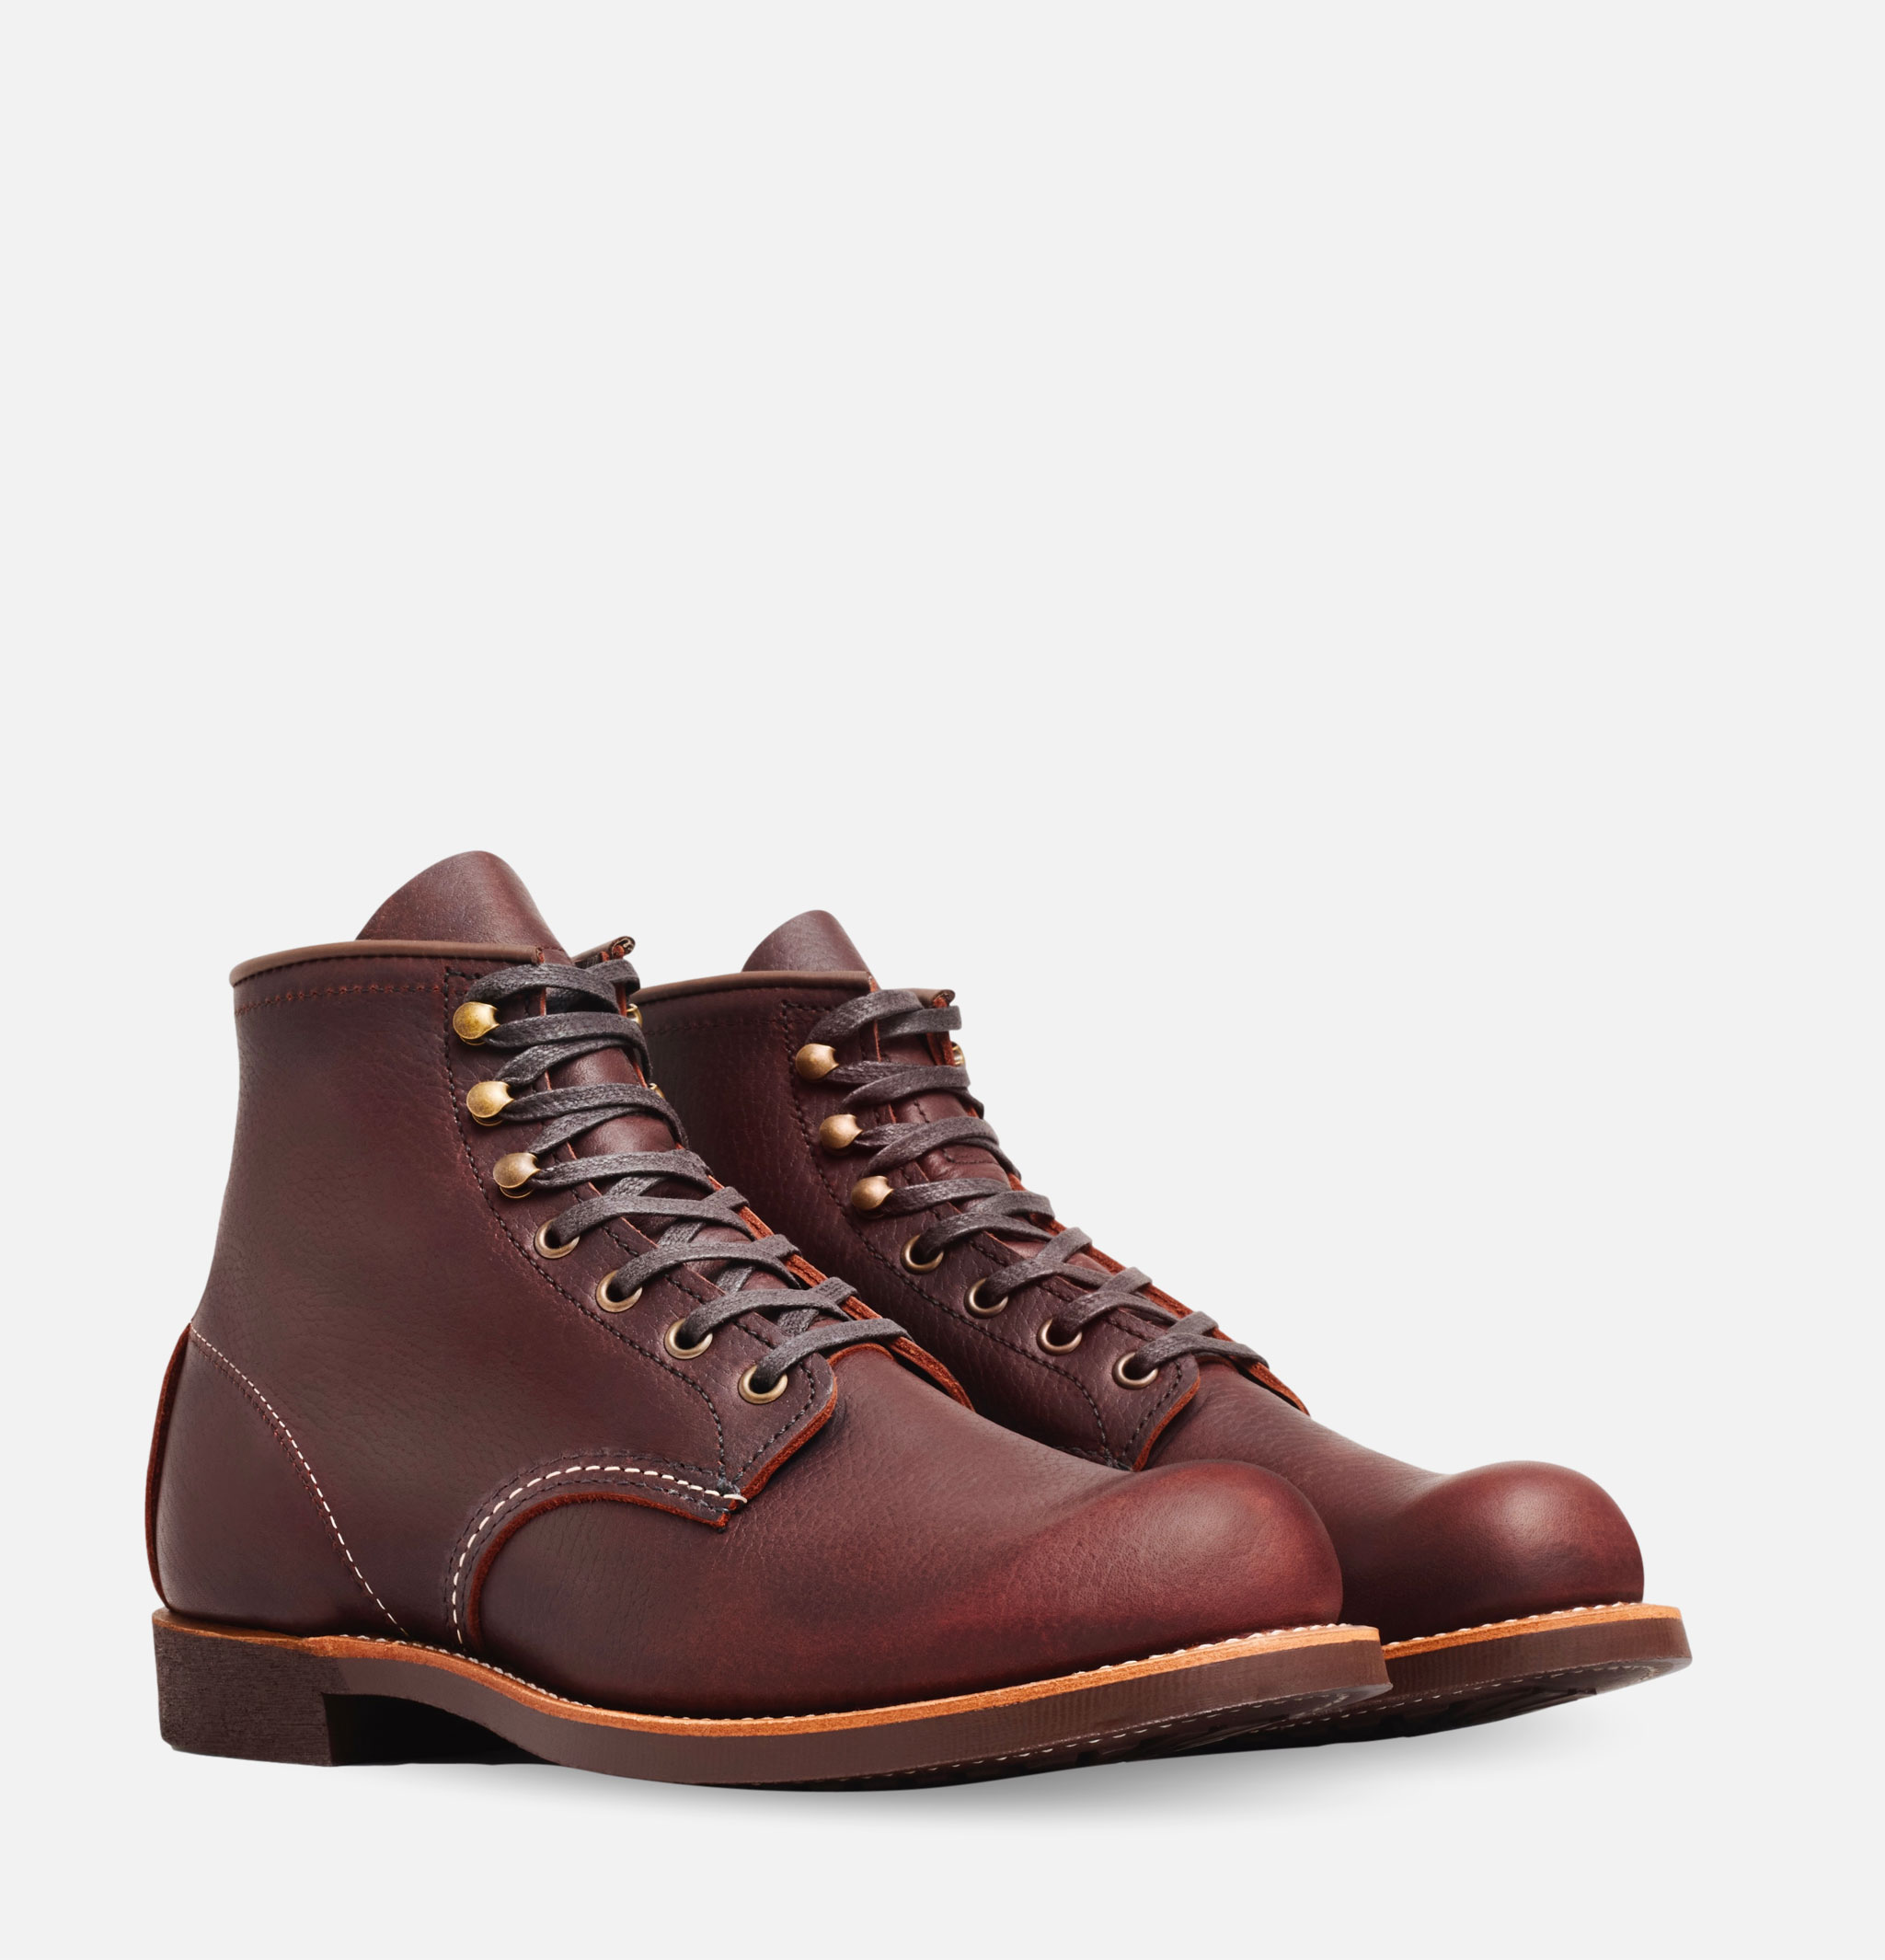 Red Wing Shoes - 3340 Blacksmith - Briar Oil